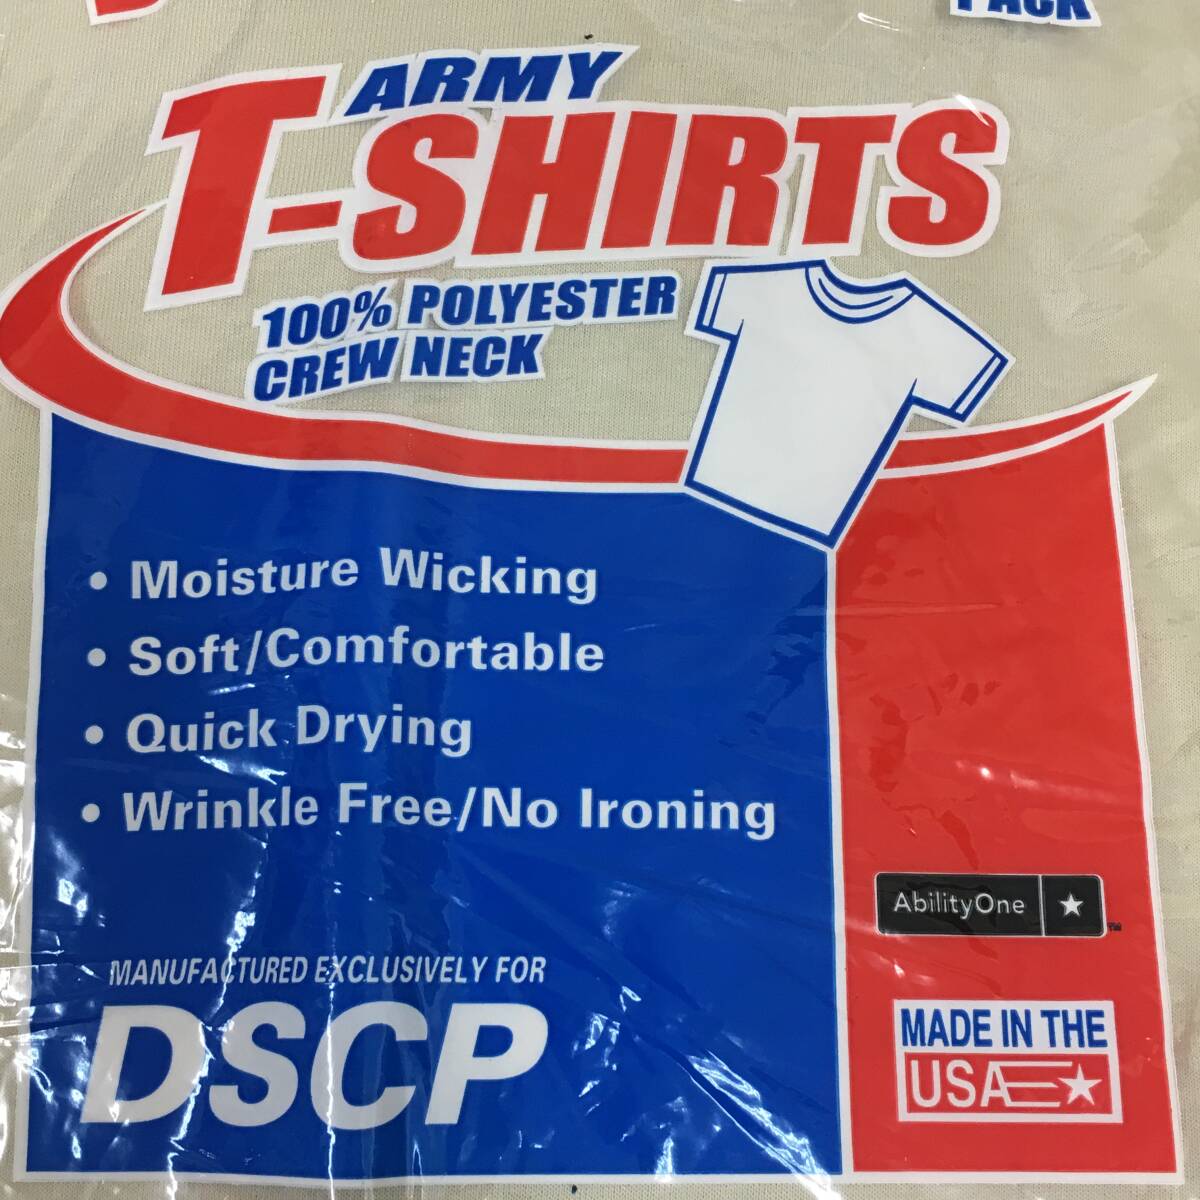  the US armed forces discharge goods unused DSCP Army T-shirt 3 sheets insertion Large size L size desert Sand SKILCRAFT control F